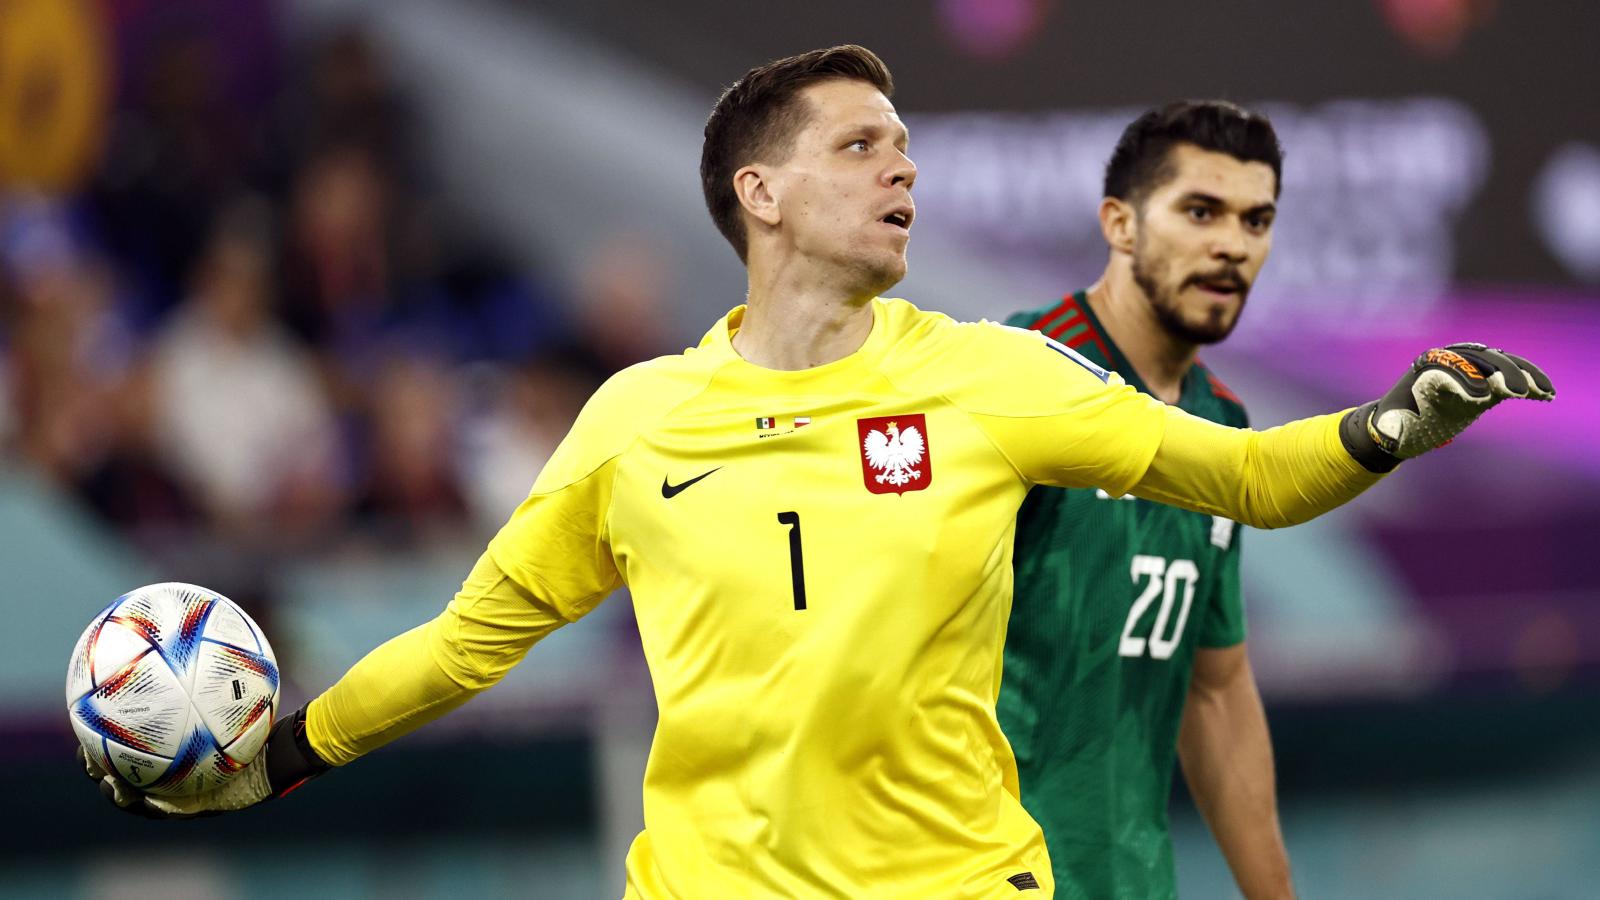 Wojciech Szczesny provided a crucial contribution in the win over Saudi Arabia, denying a penalty kick and pulling off a few more saves